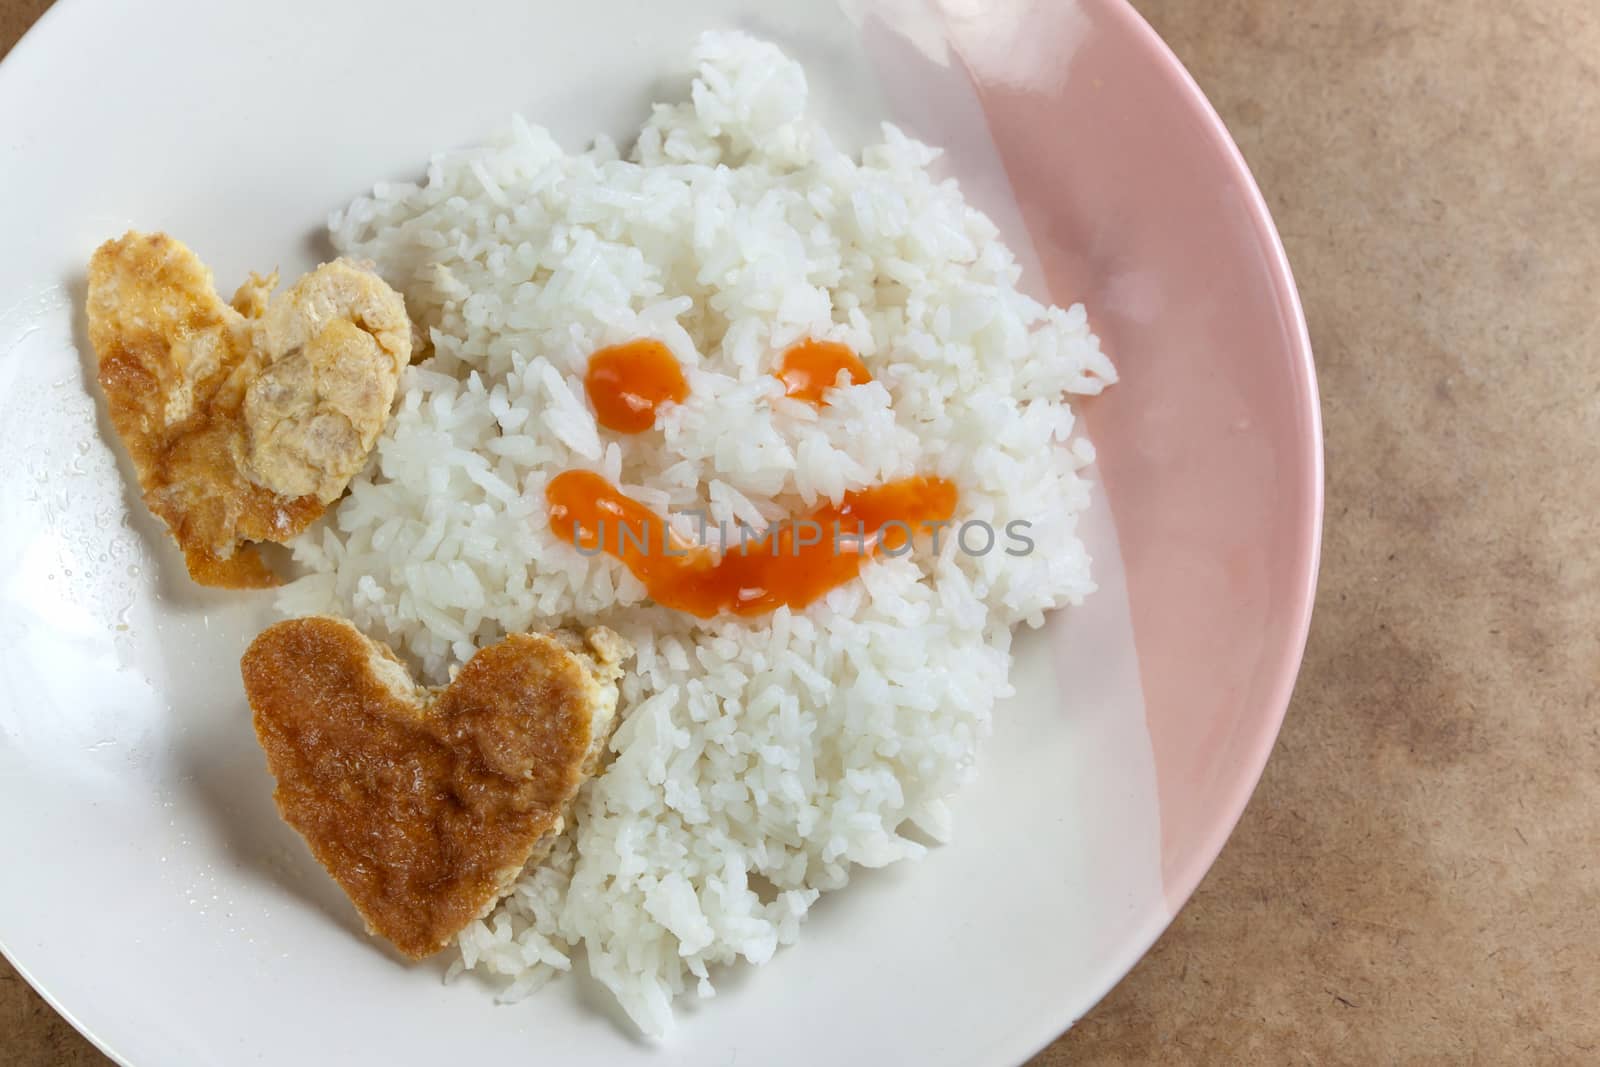 Idea for Valentine day meal cooked rice omelet in heart shape for eating simple cheap and quick food